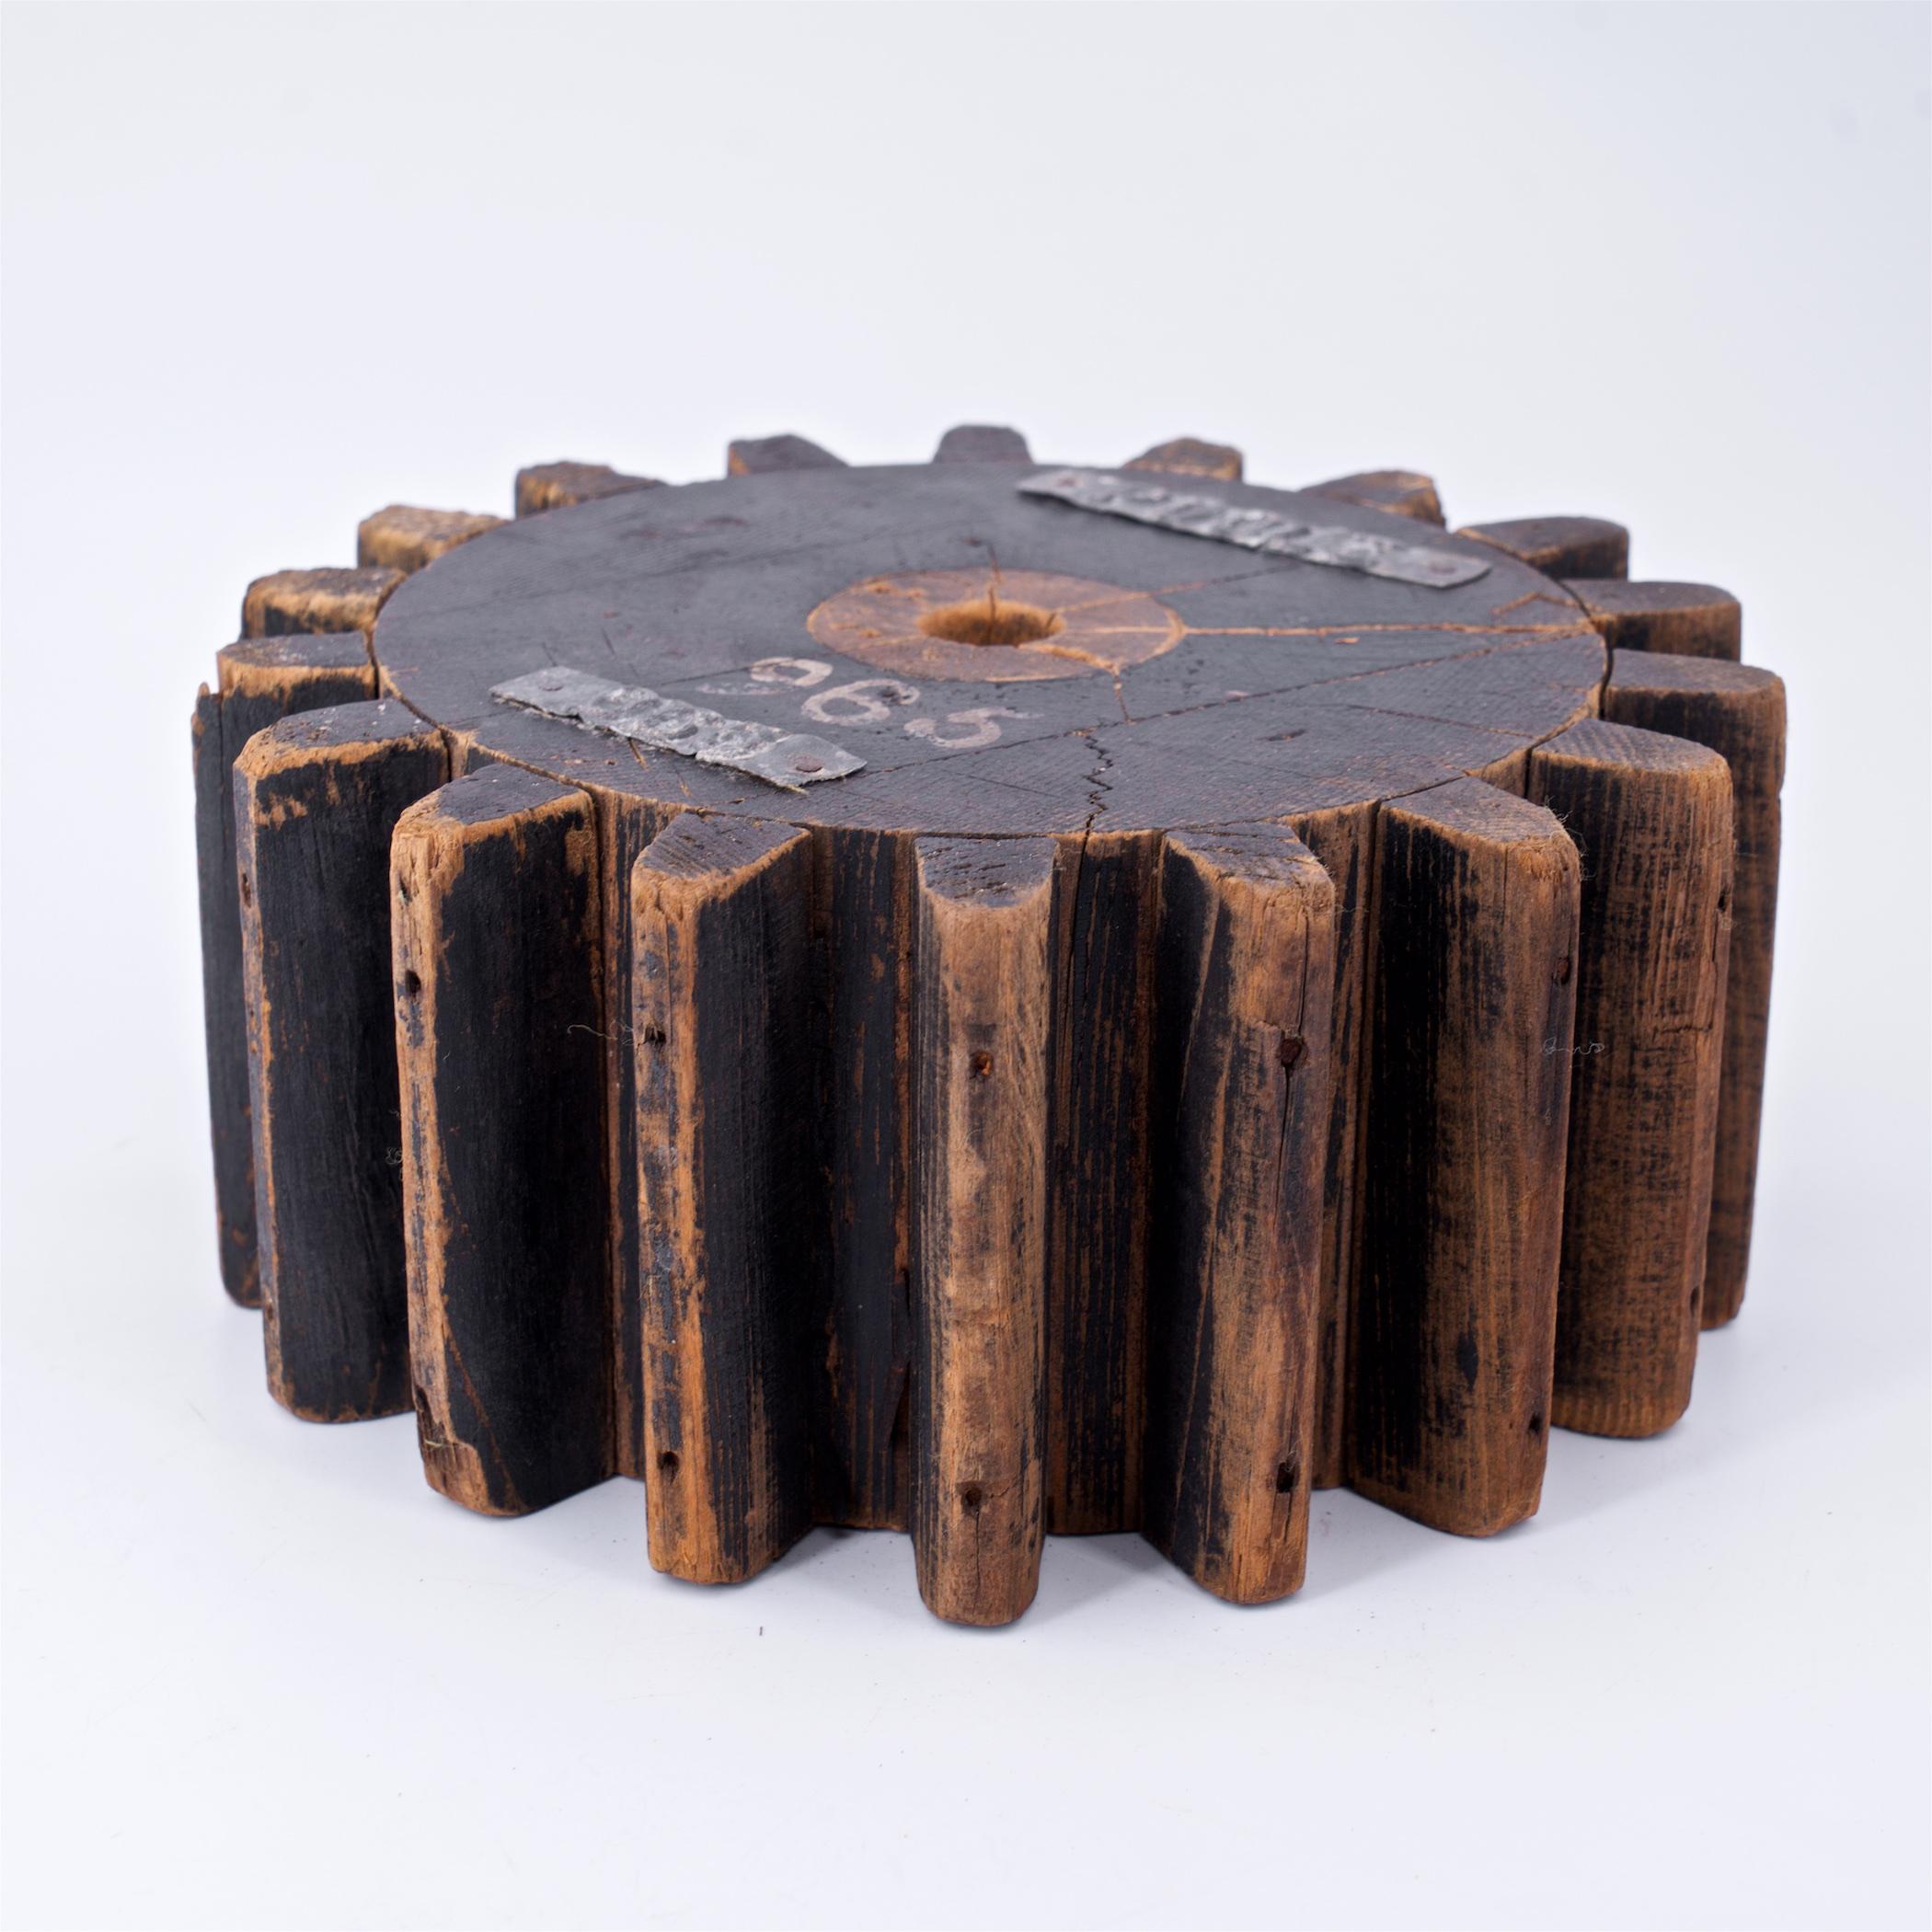 Hand-Crafted 1930s Industrial Wooden Gear Table Sculpture Decor Foundry Factory Object